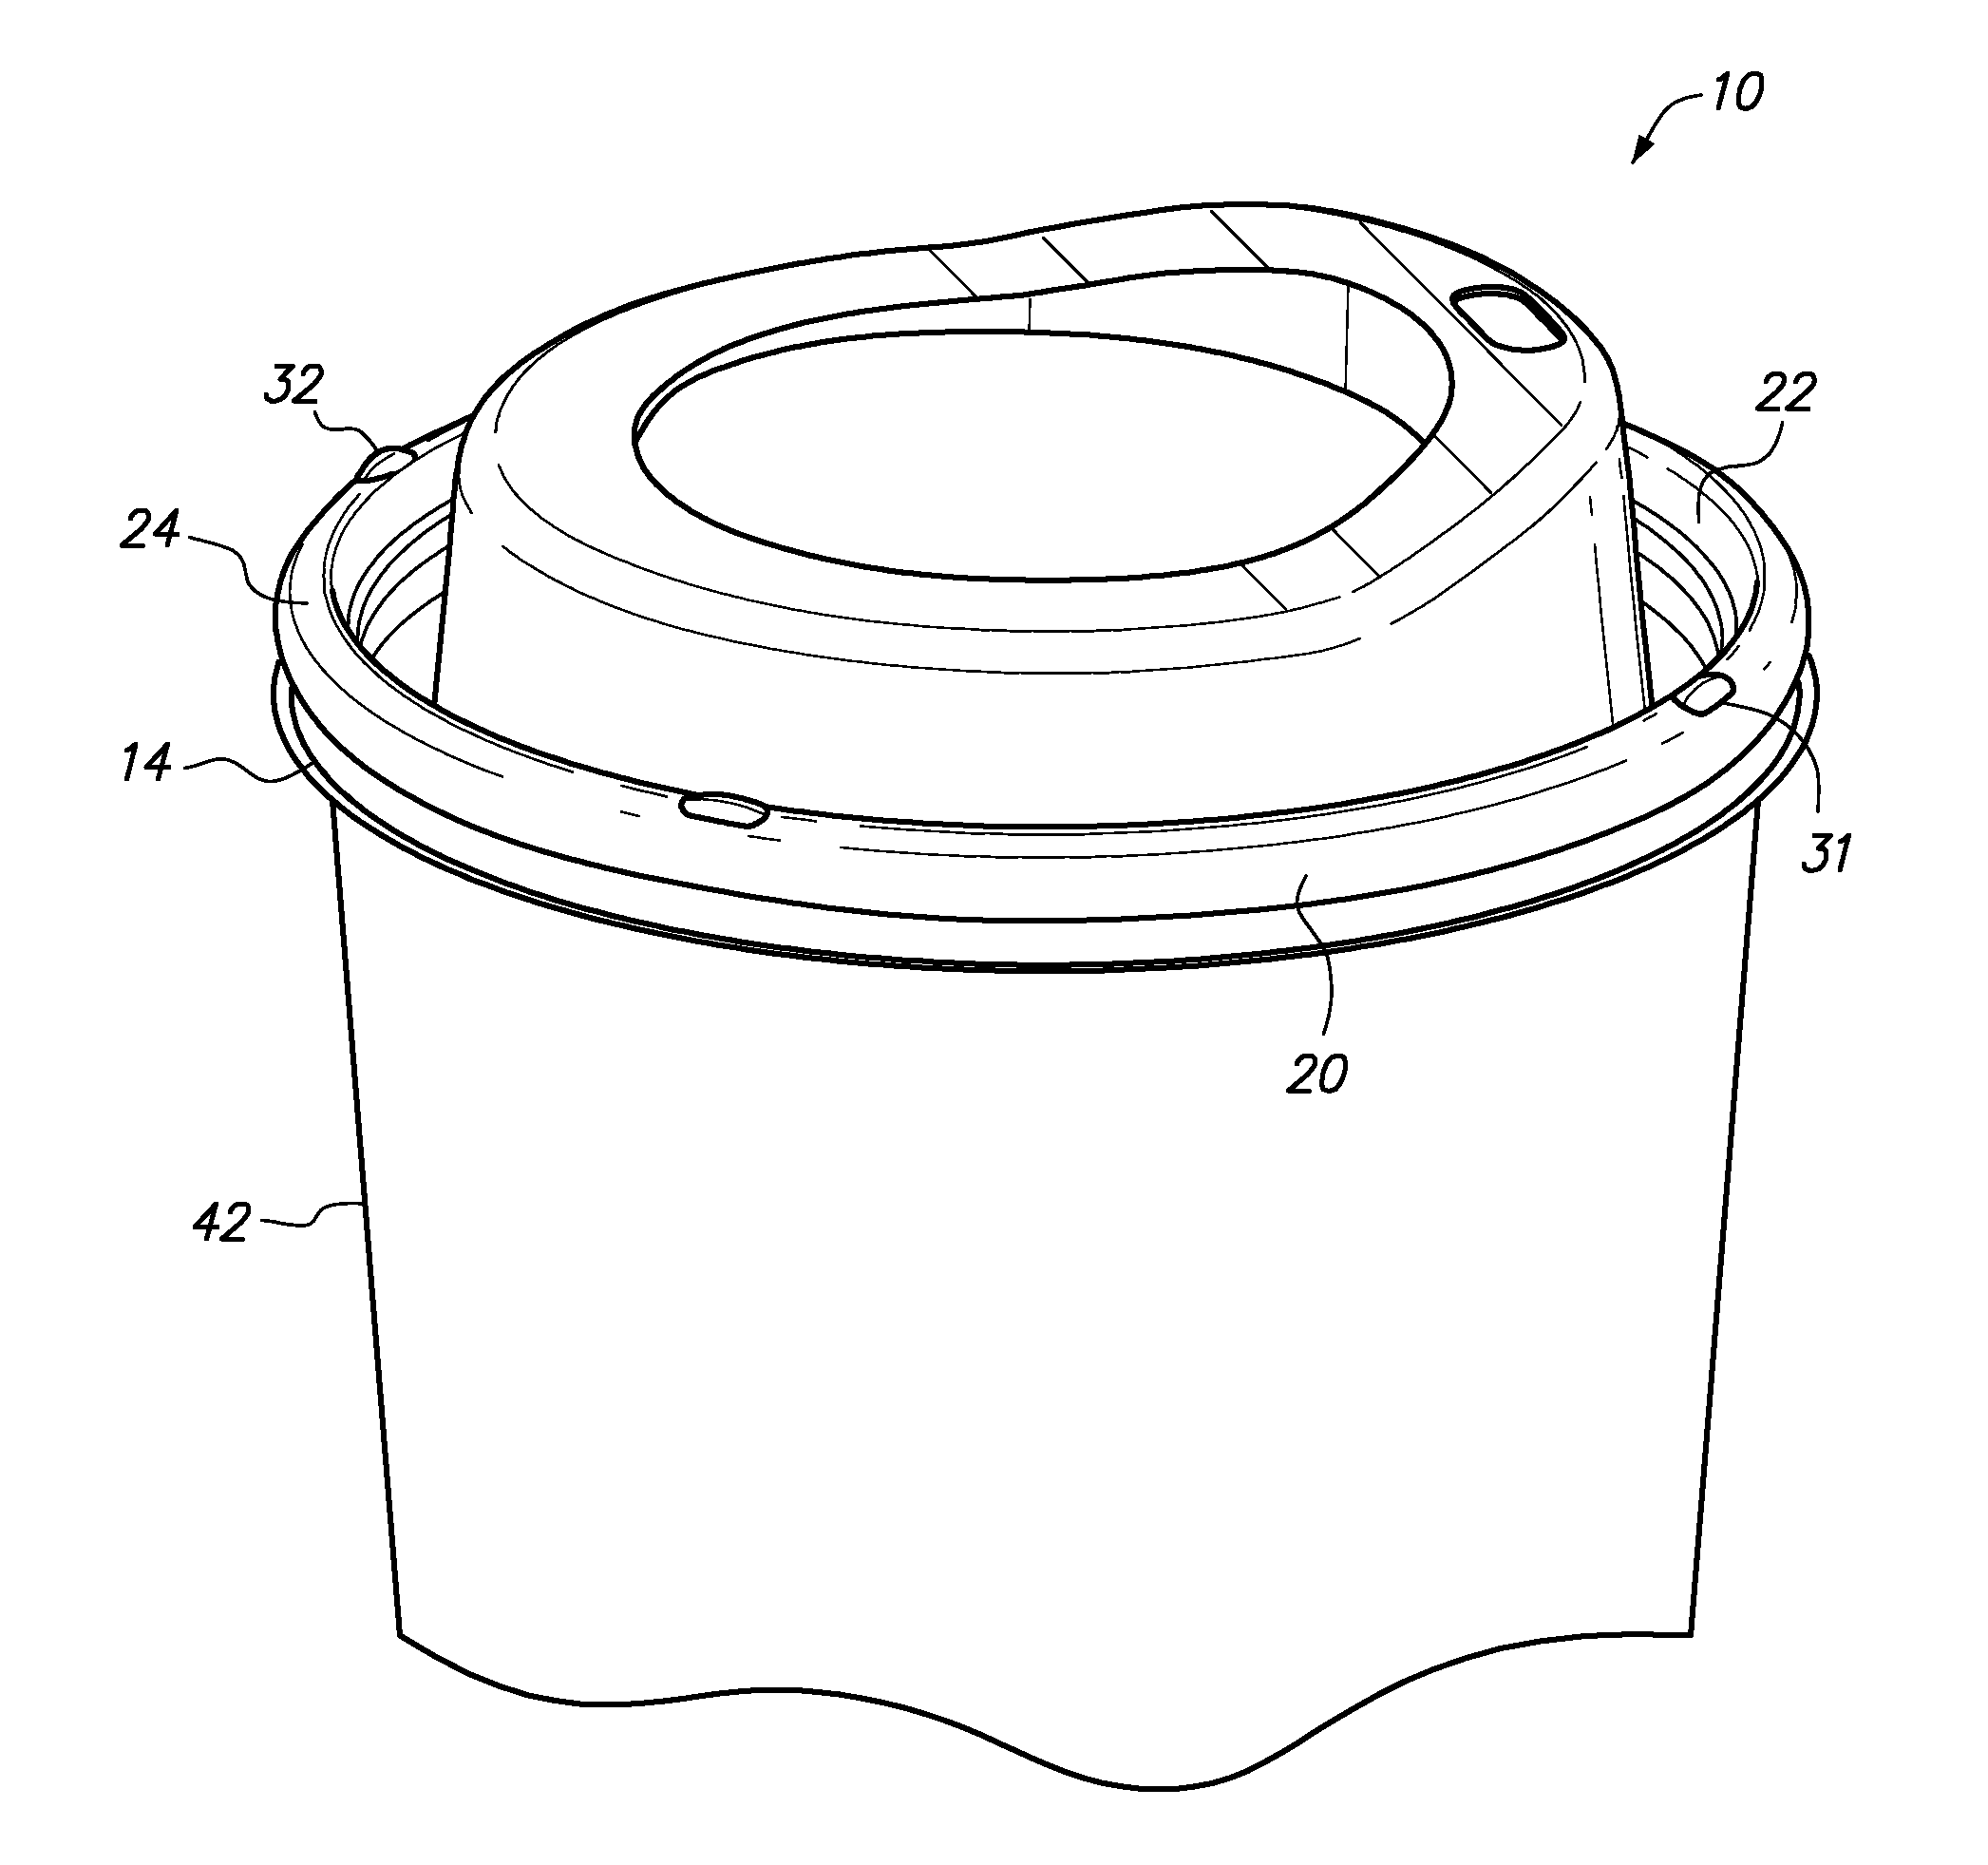 Closure lid with identifying means